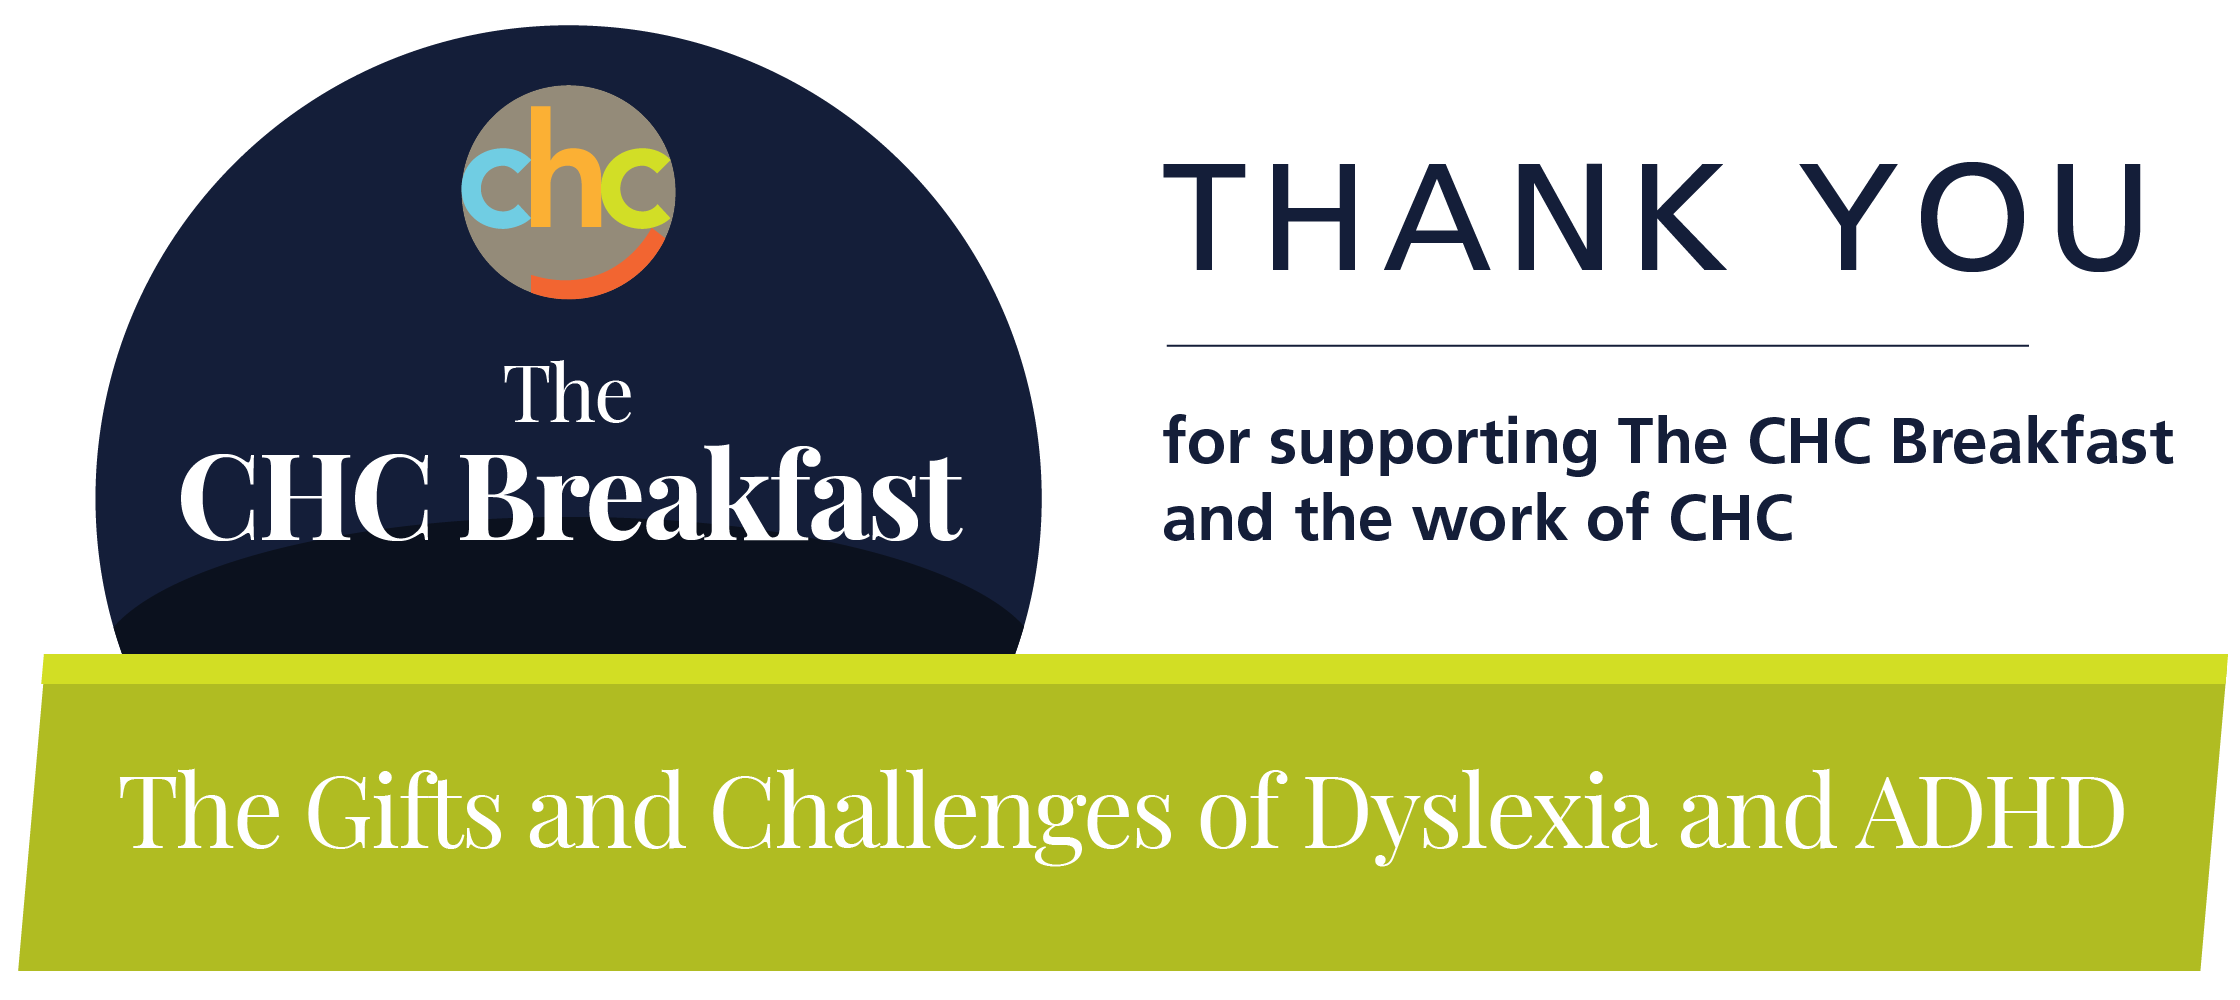 Thank you for supporting The CHC Breakfast, Thursday, March 5, 2020